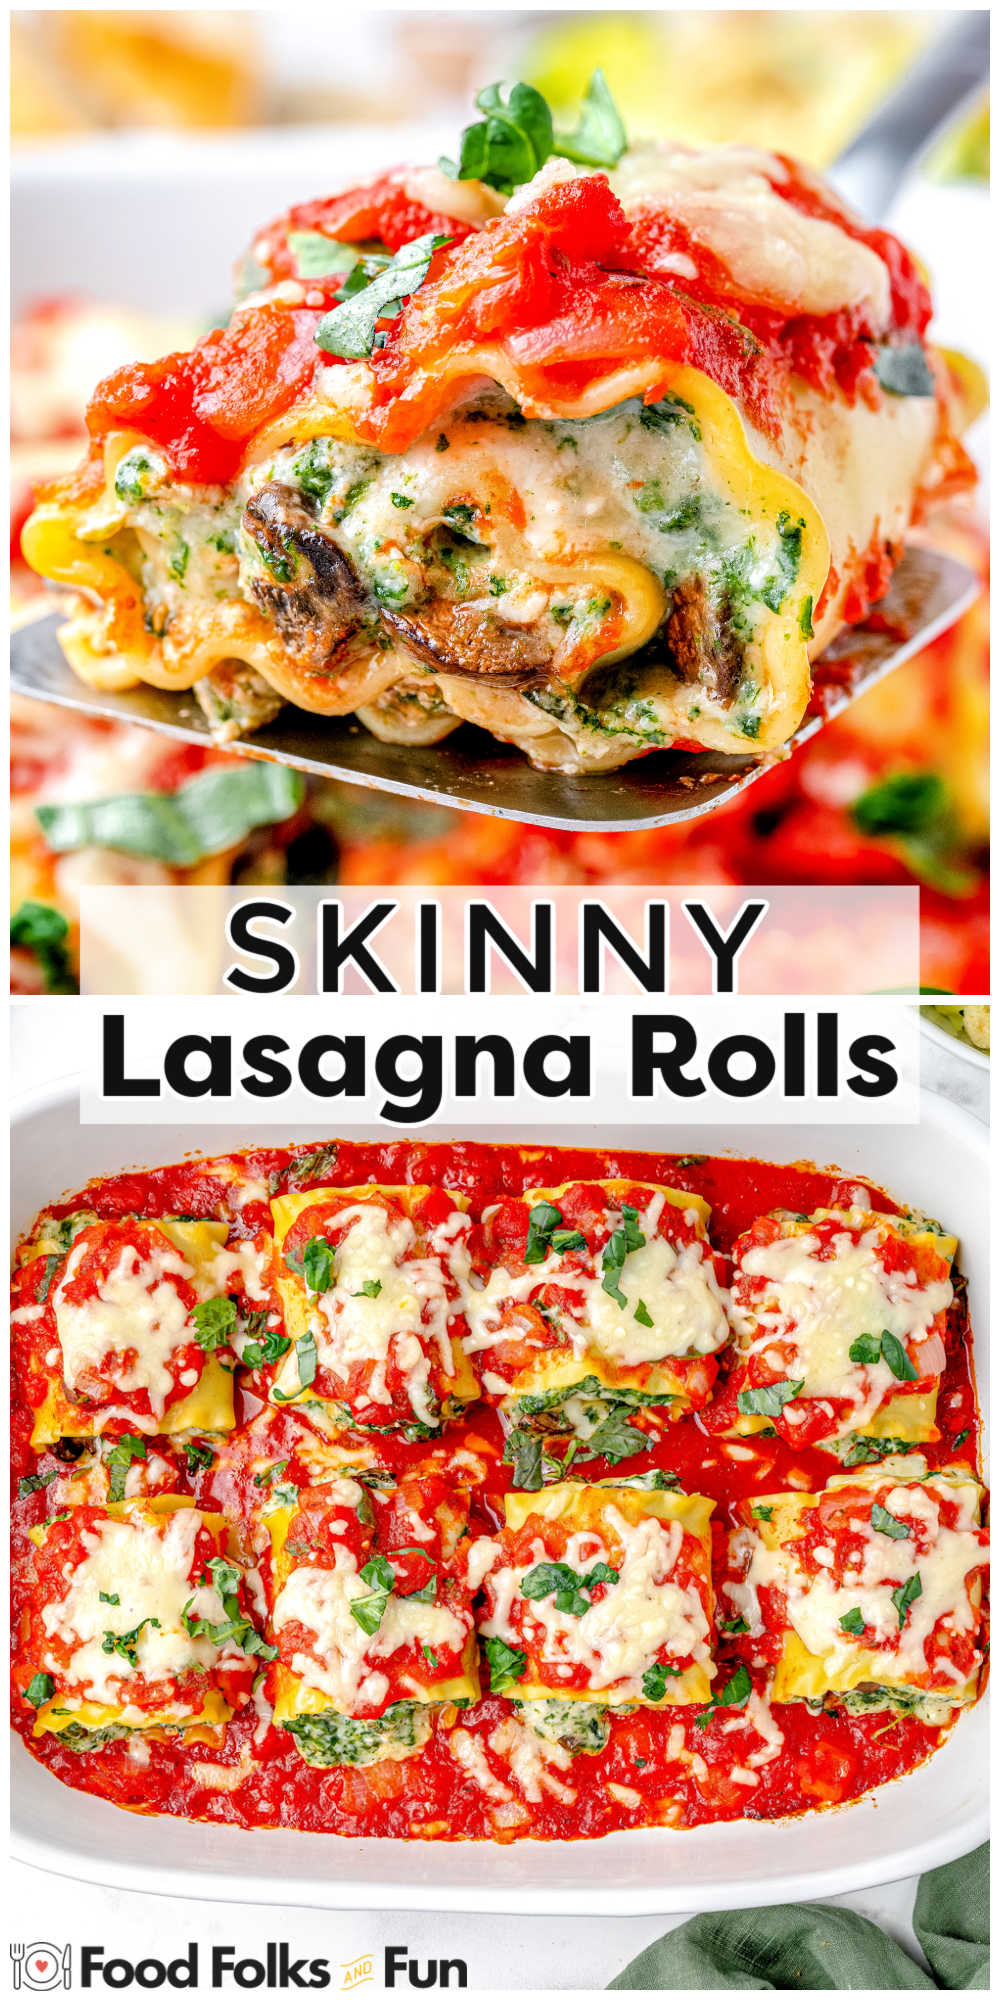 Skinny Lasagna Rolls are packed with mushrooms and spinach and smothered in a vibrant homemade sauce. Come find out the secret to cutting fat without cutting flavor! via @foodfolksandfun